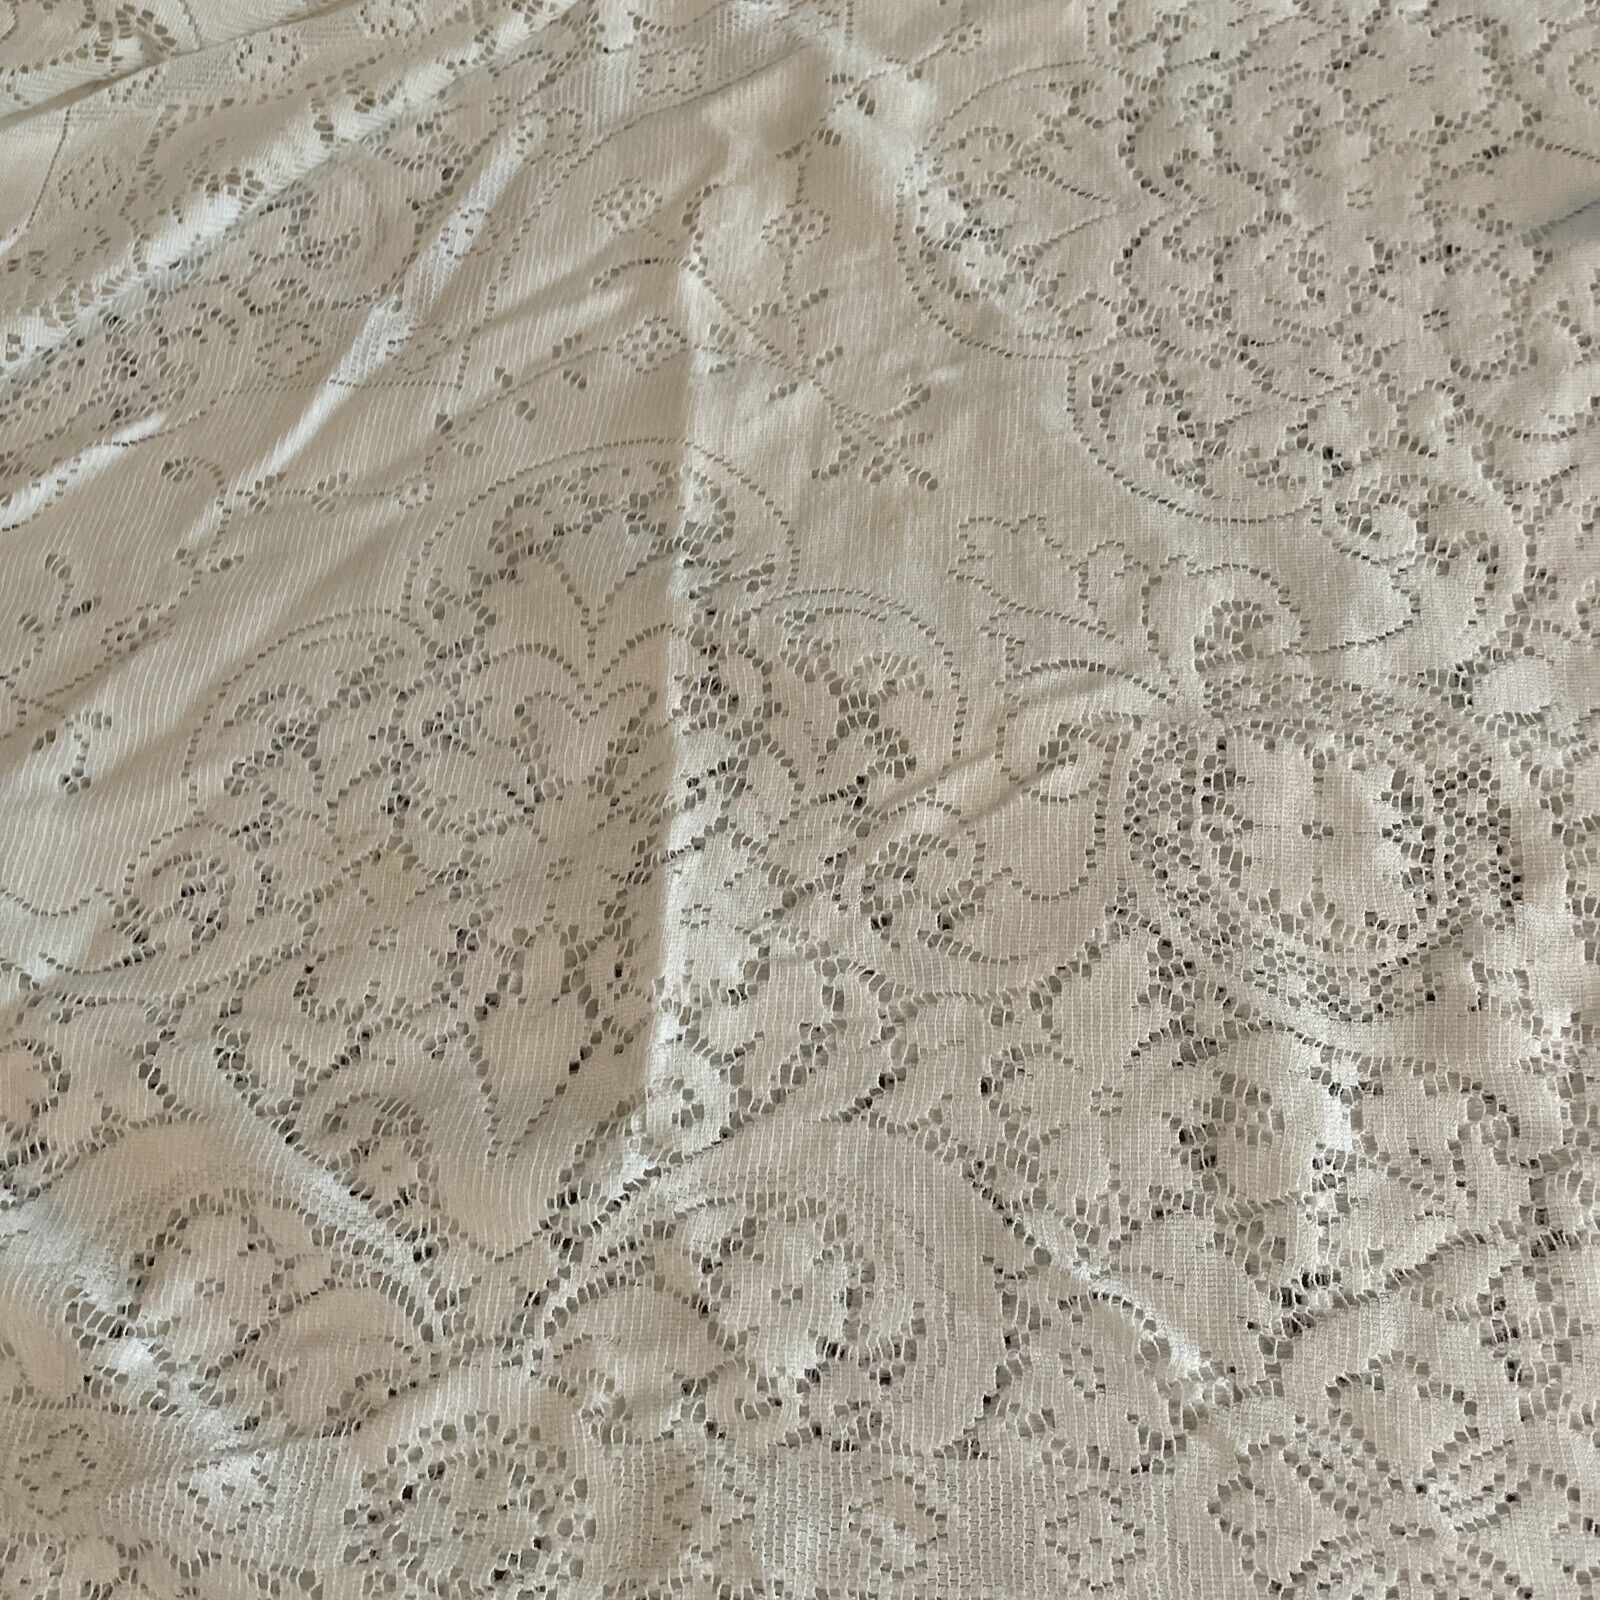 Lovely White Vintage Lace Tablecloth Flowers Swirls 84” X 64”